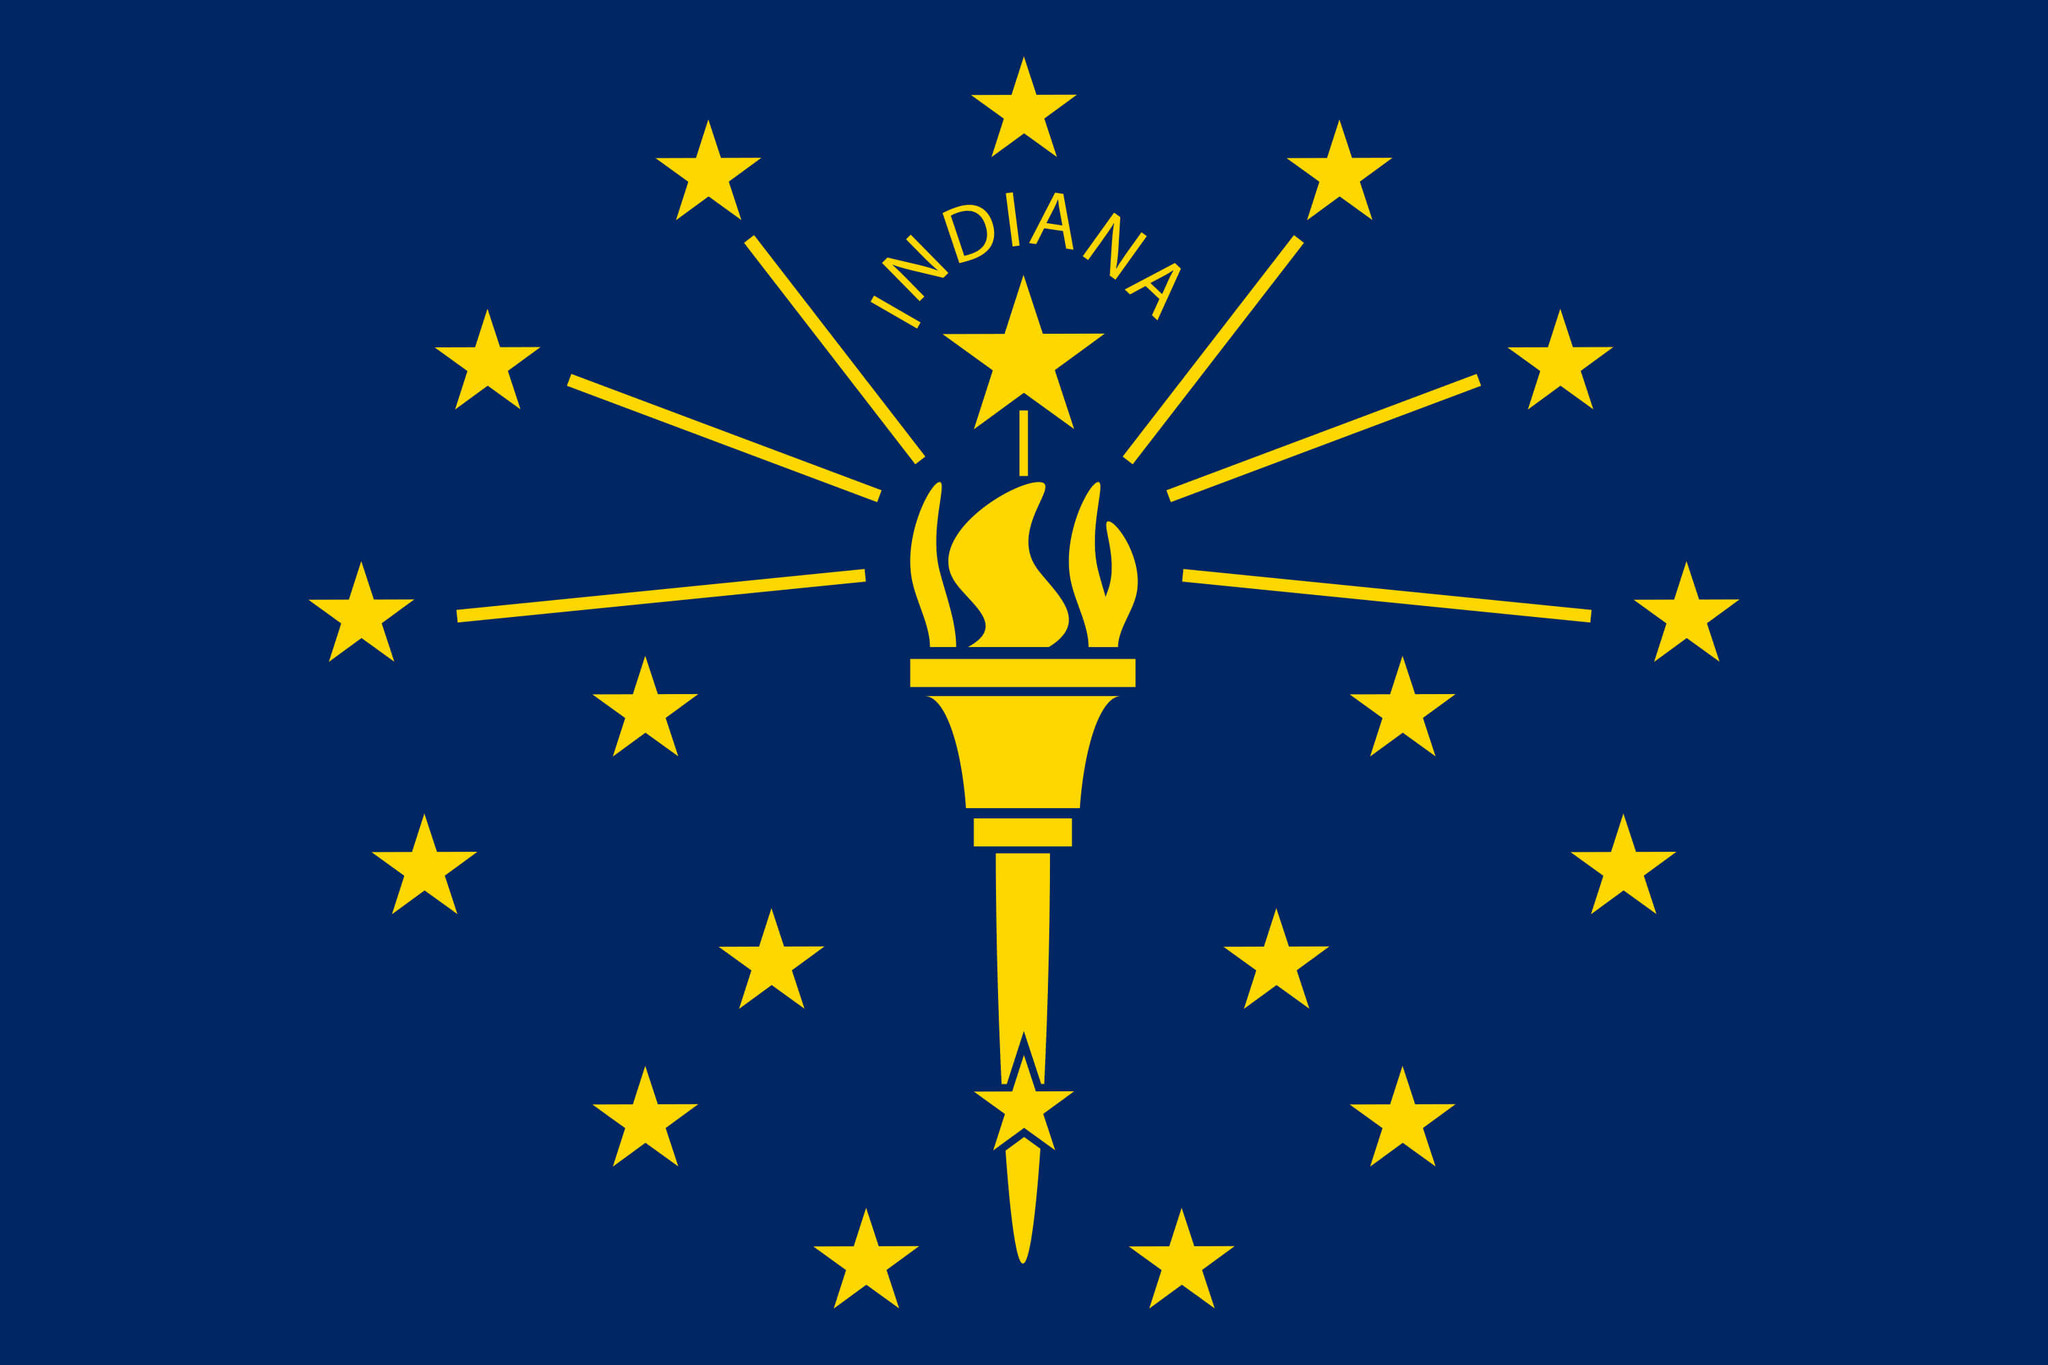 Download Indiana flag vector - country flags